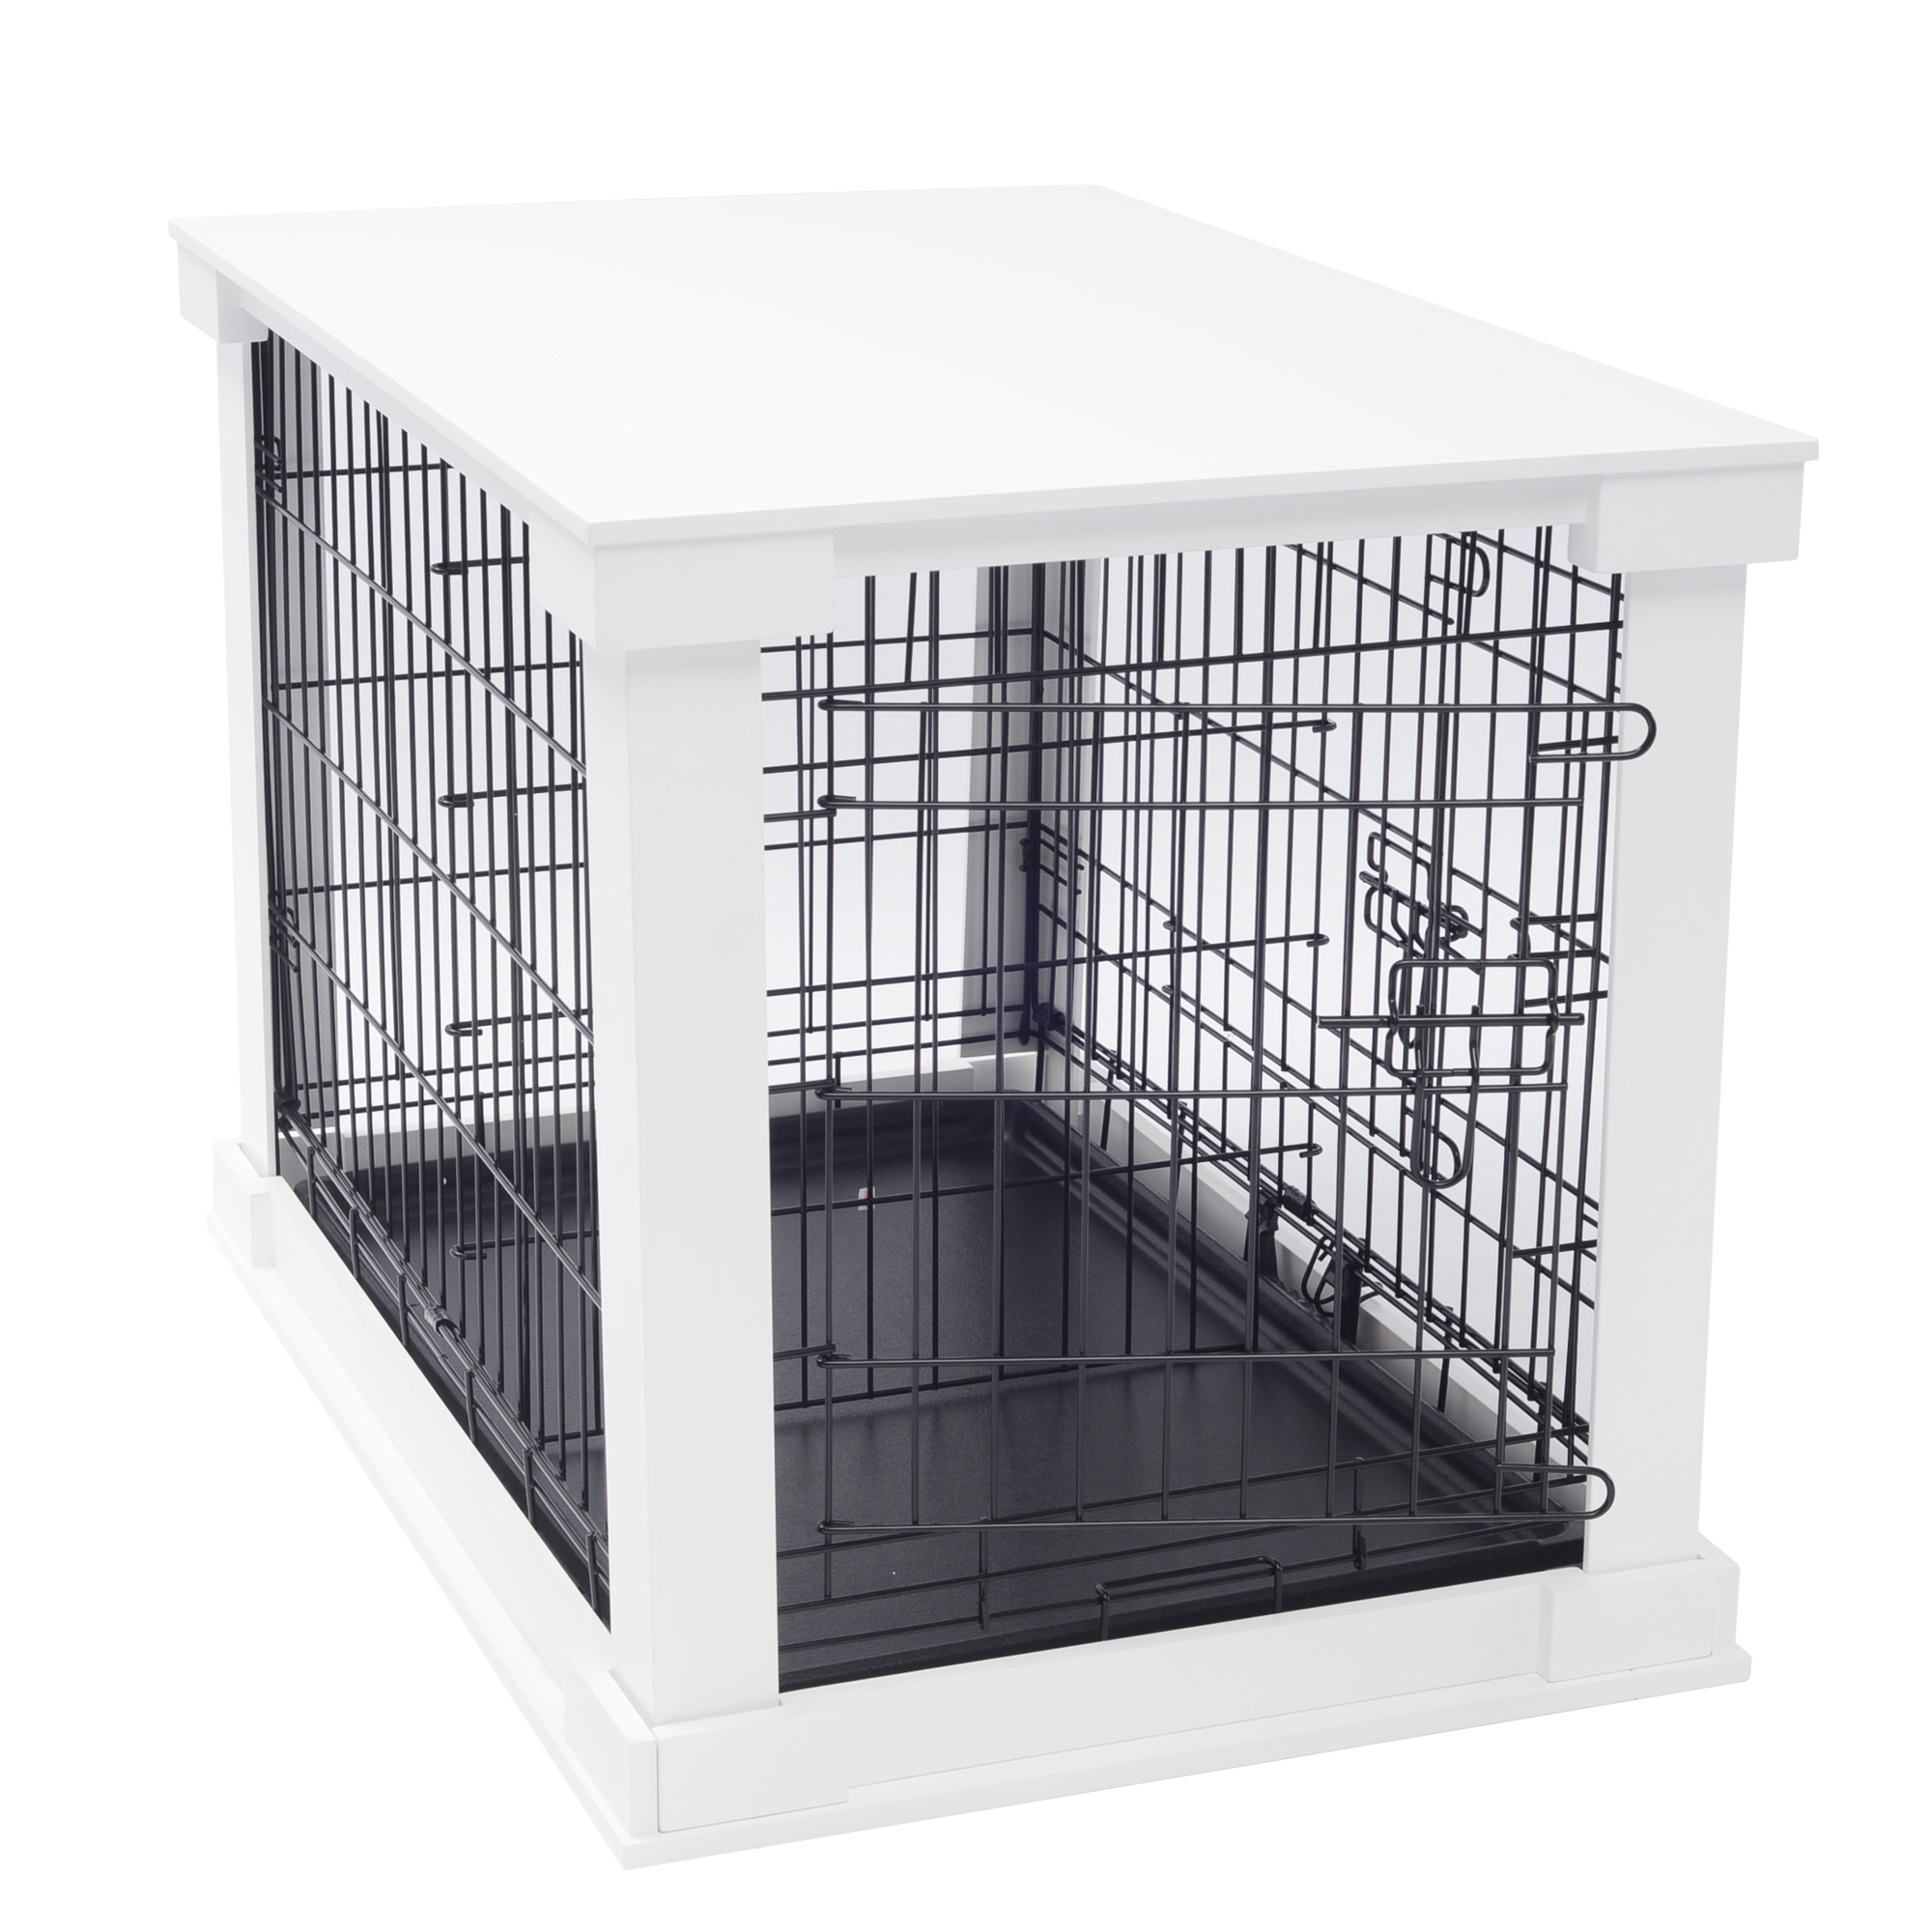 Merry Products, Cage with Crate Cover, White, Medium, Model PTH0241720100